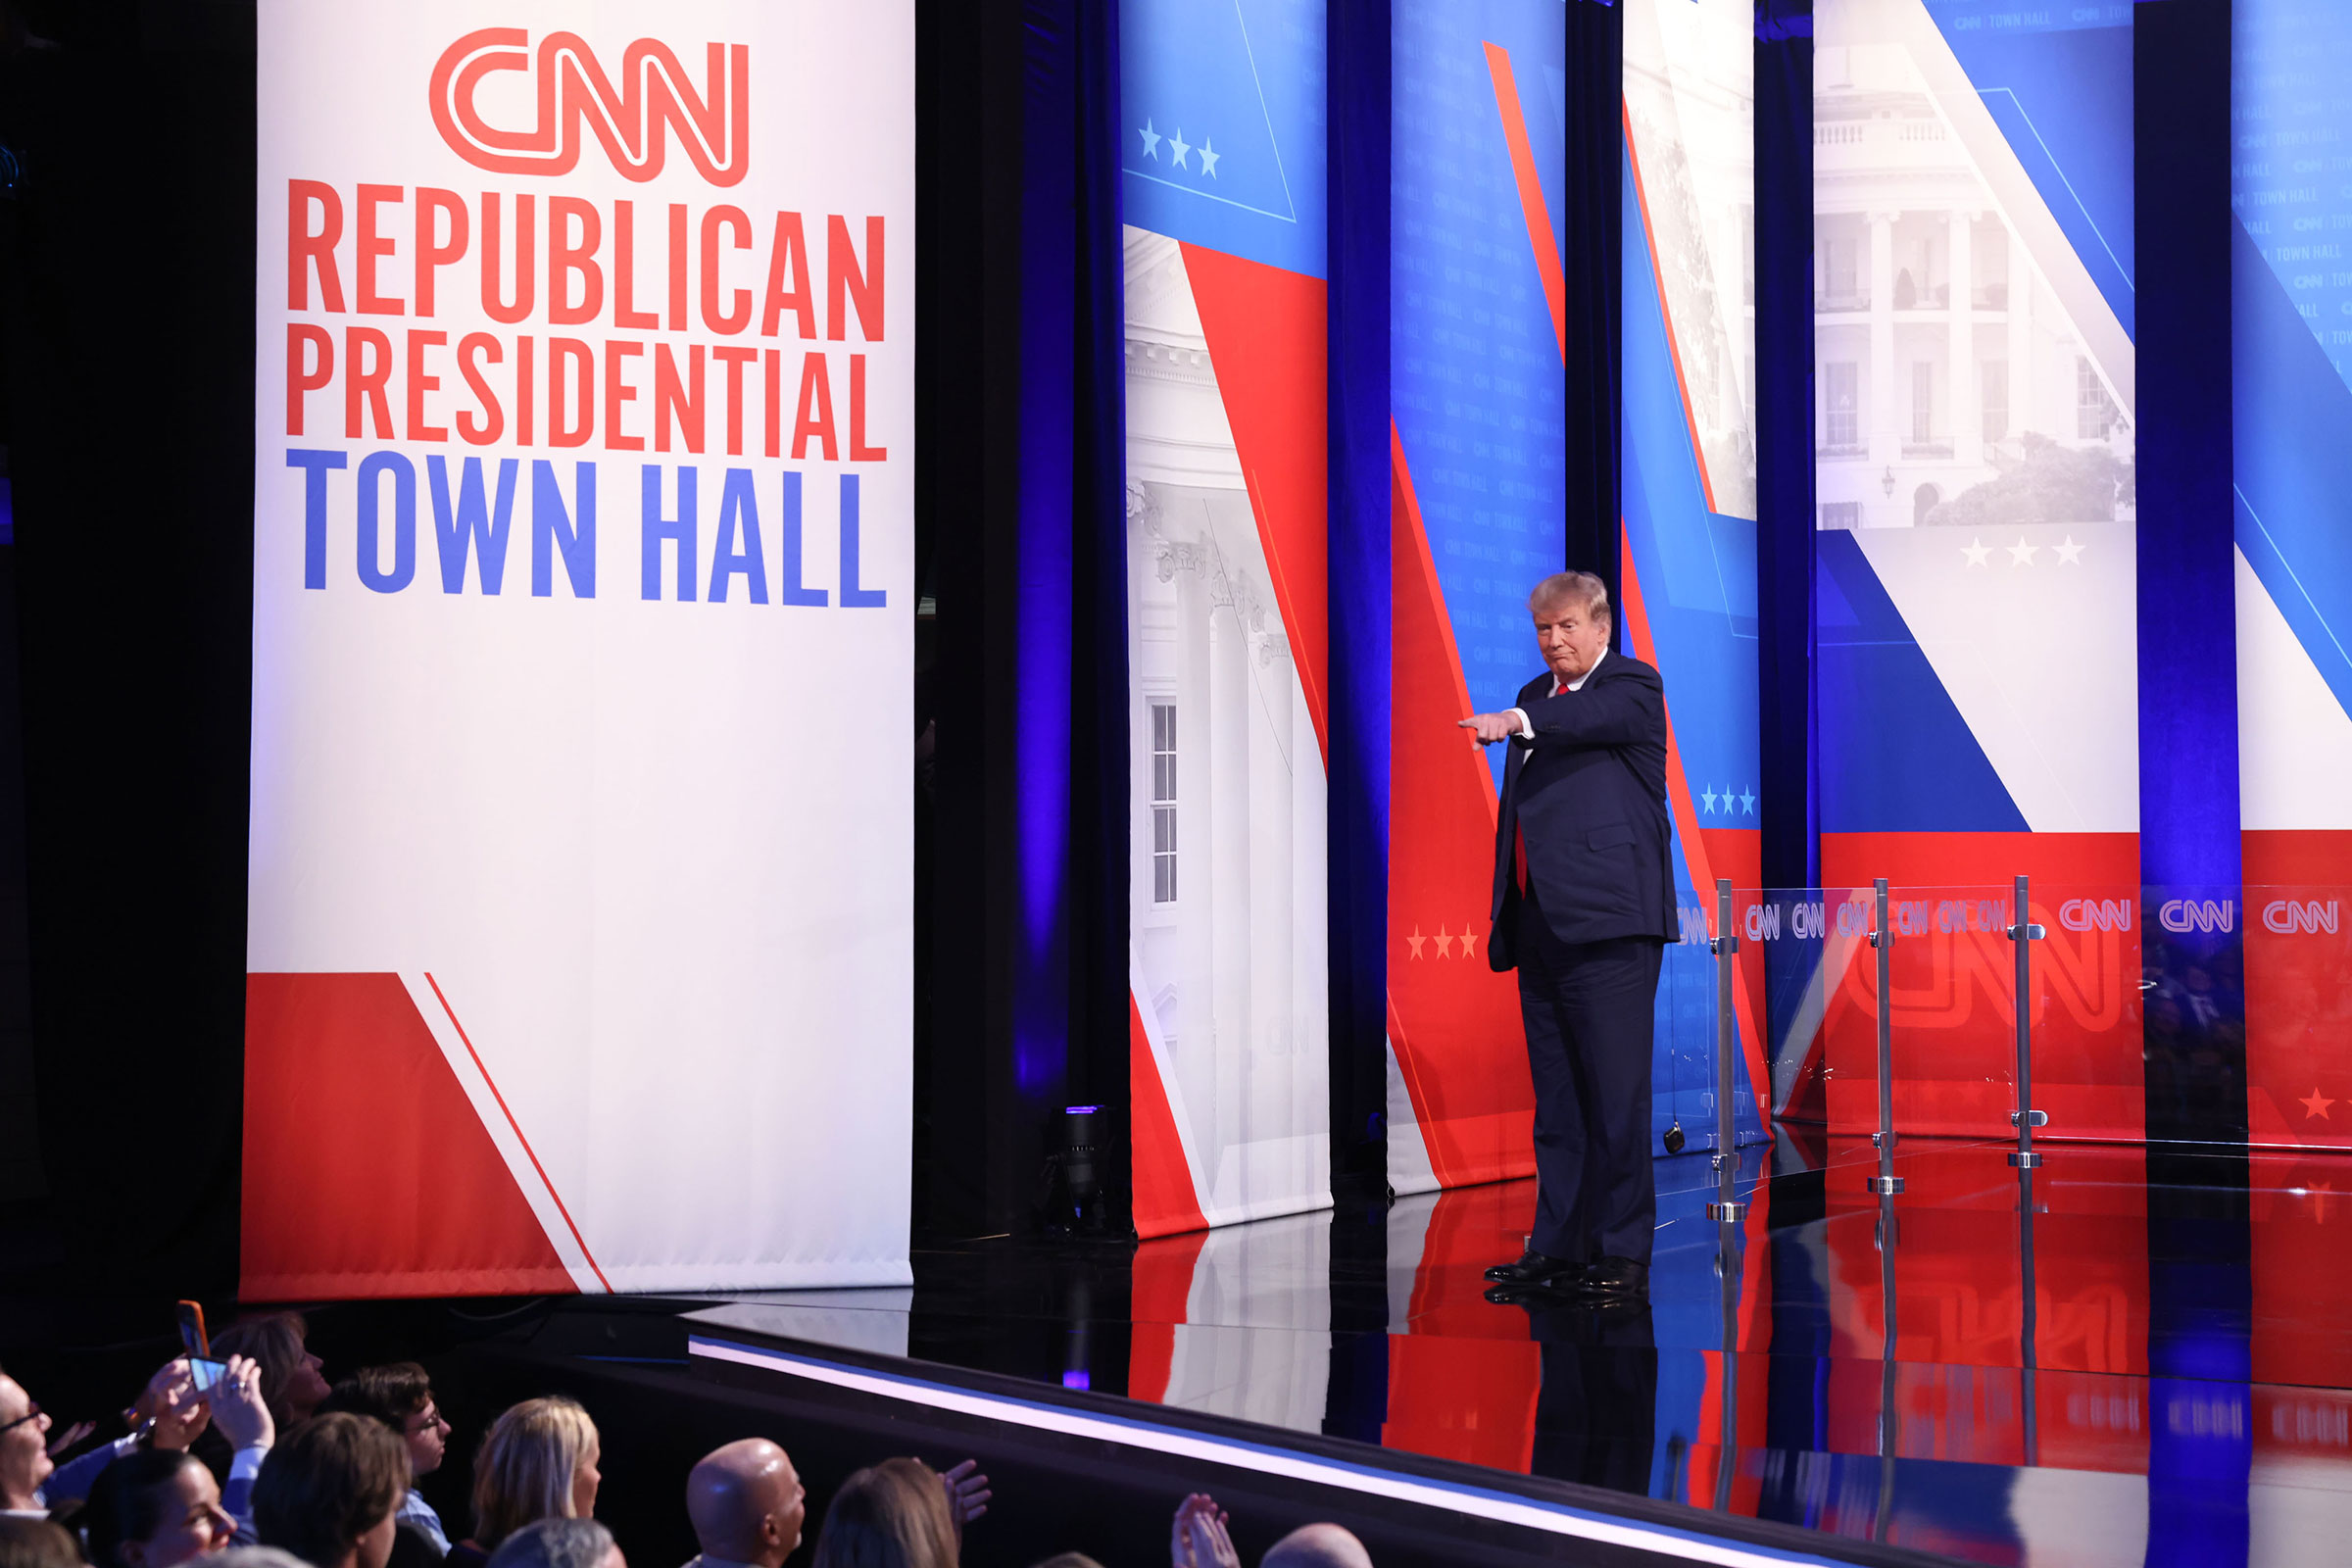 Former President Donald Trump points to an audience member during the CNN Republican Presidential Town Hall in Manchester, New Hampshire.